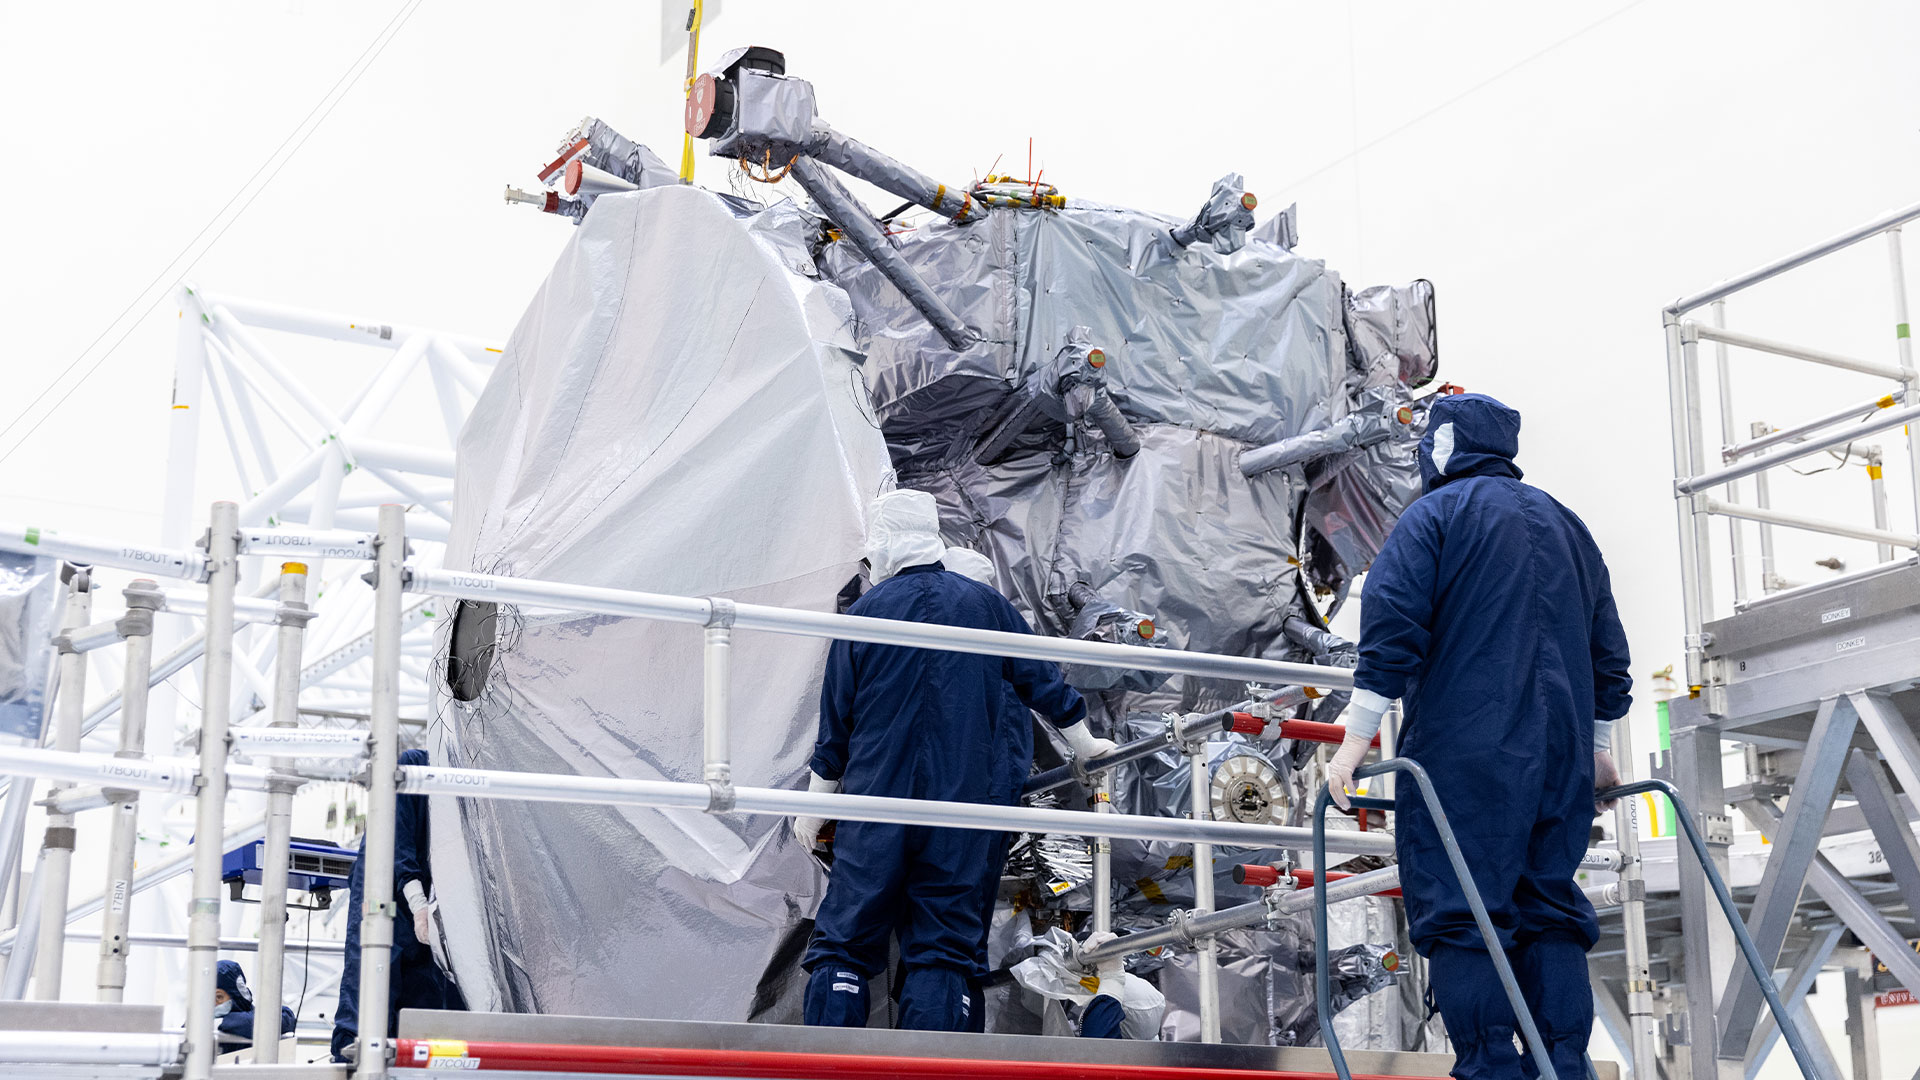 Europa Clipper's high gain antenna sits on a platform surrounded by workers in protective clothing.